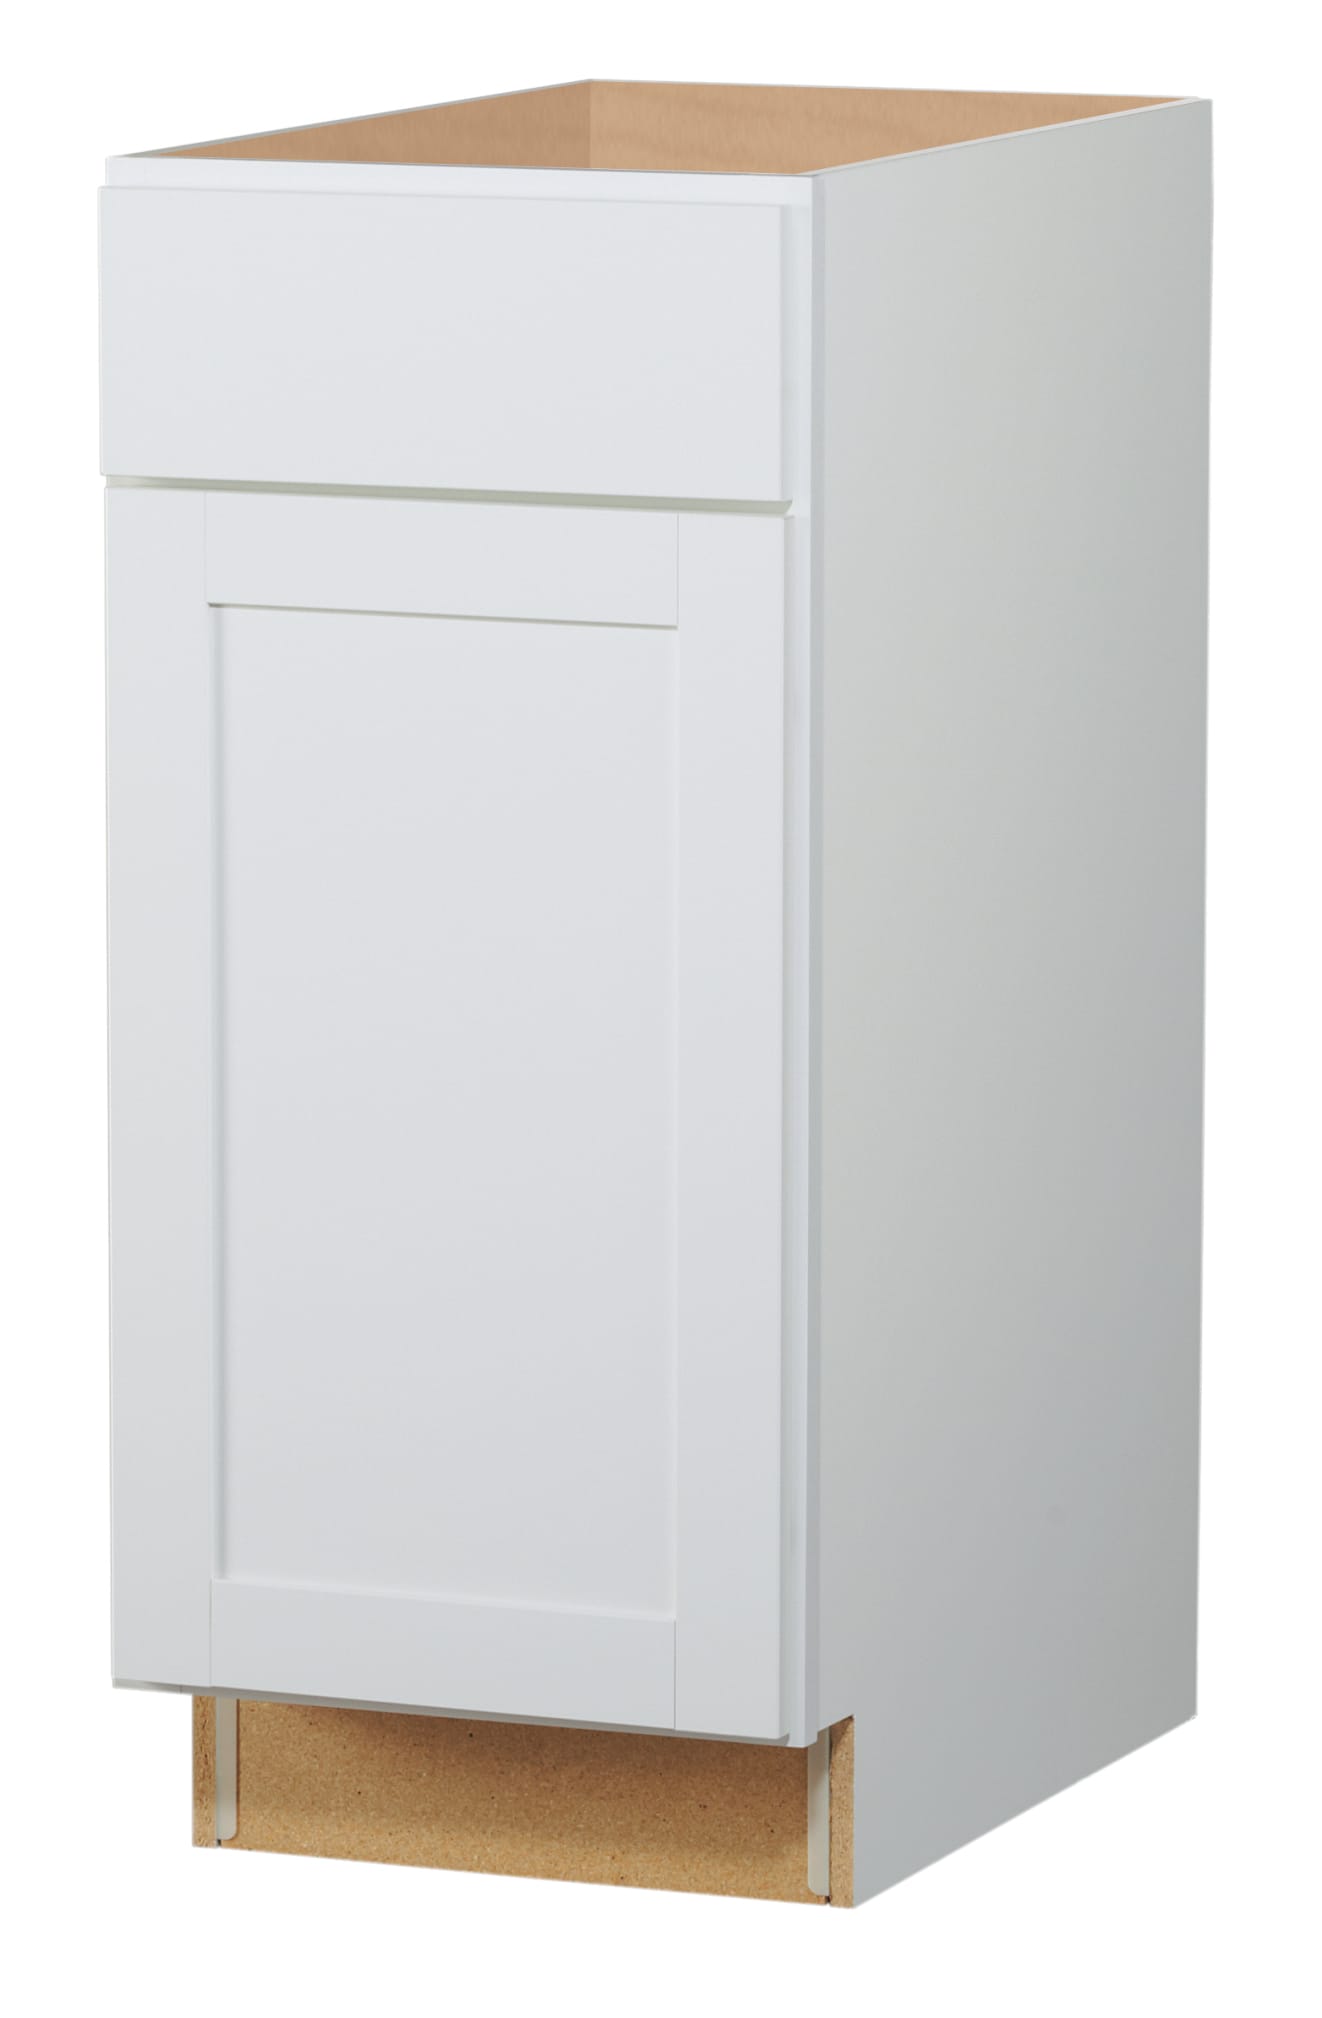 Diamond Now Arcadia 18 In W X 35 H 23 75 D White Door And Drawer Base Fully Assembled Cabinet Recessed Panel Shaker Style The Kitchen Cabinets Department At Lowes Com